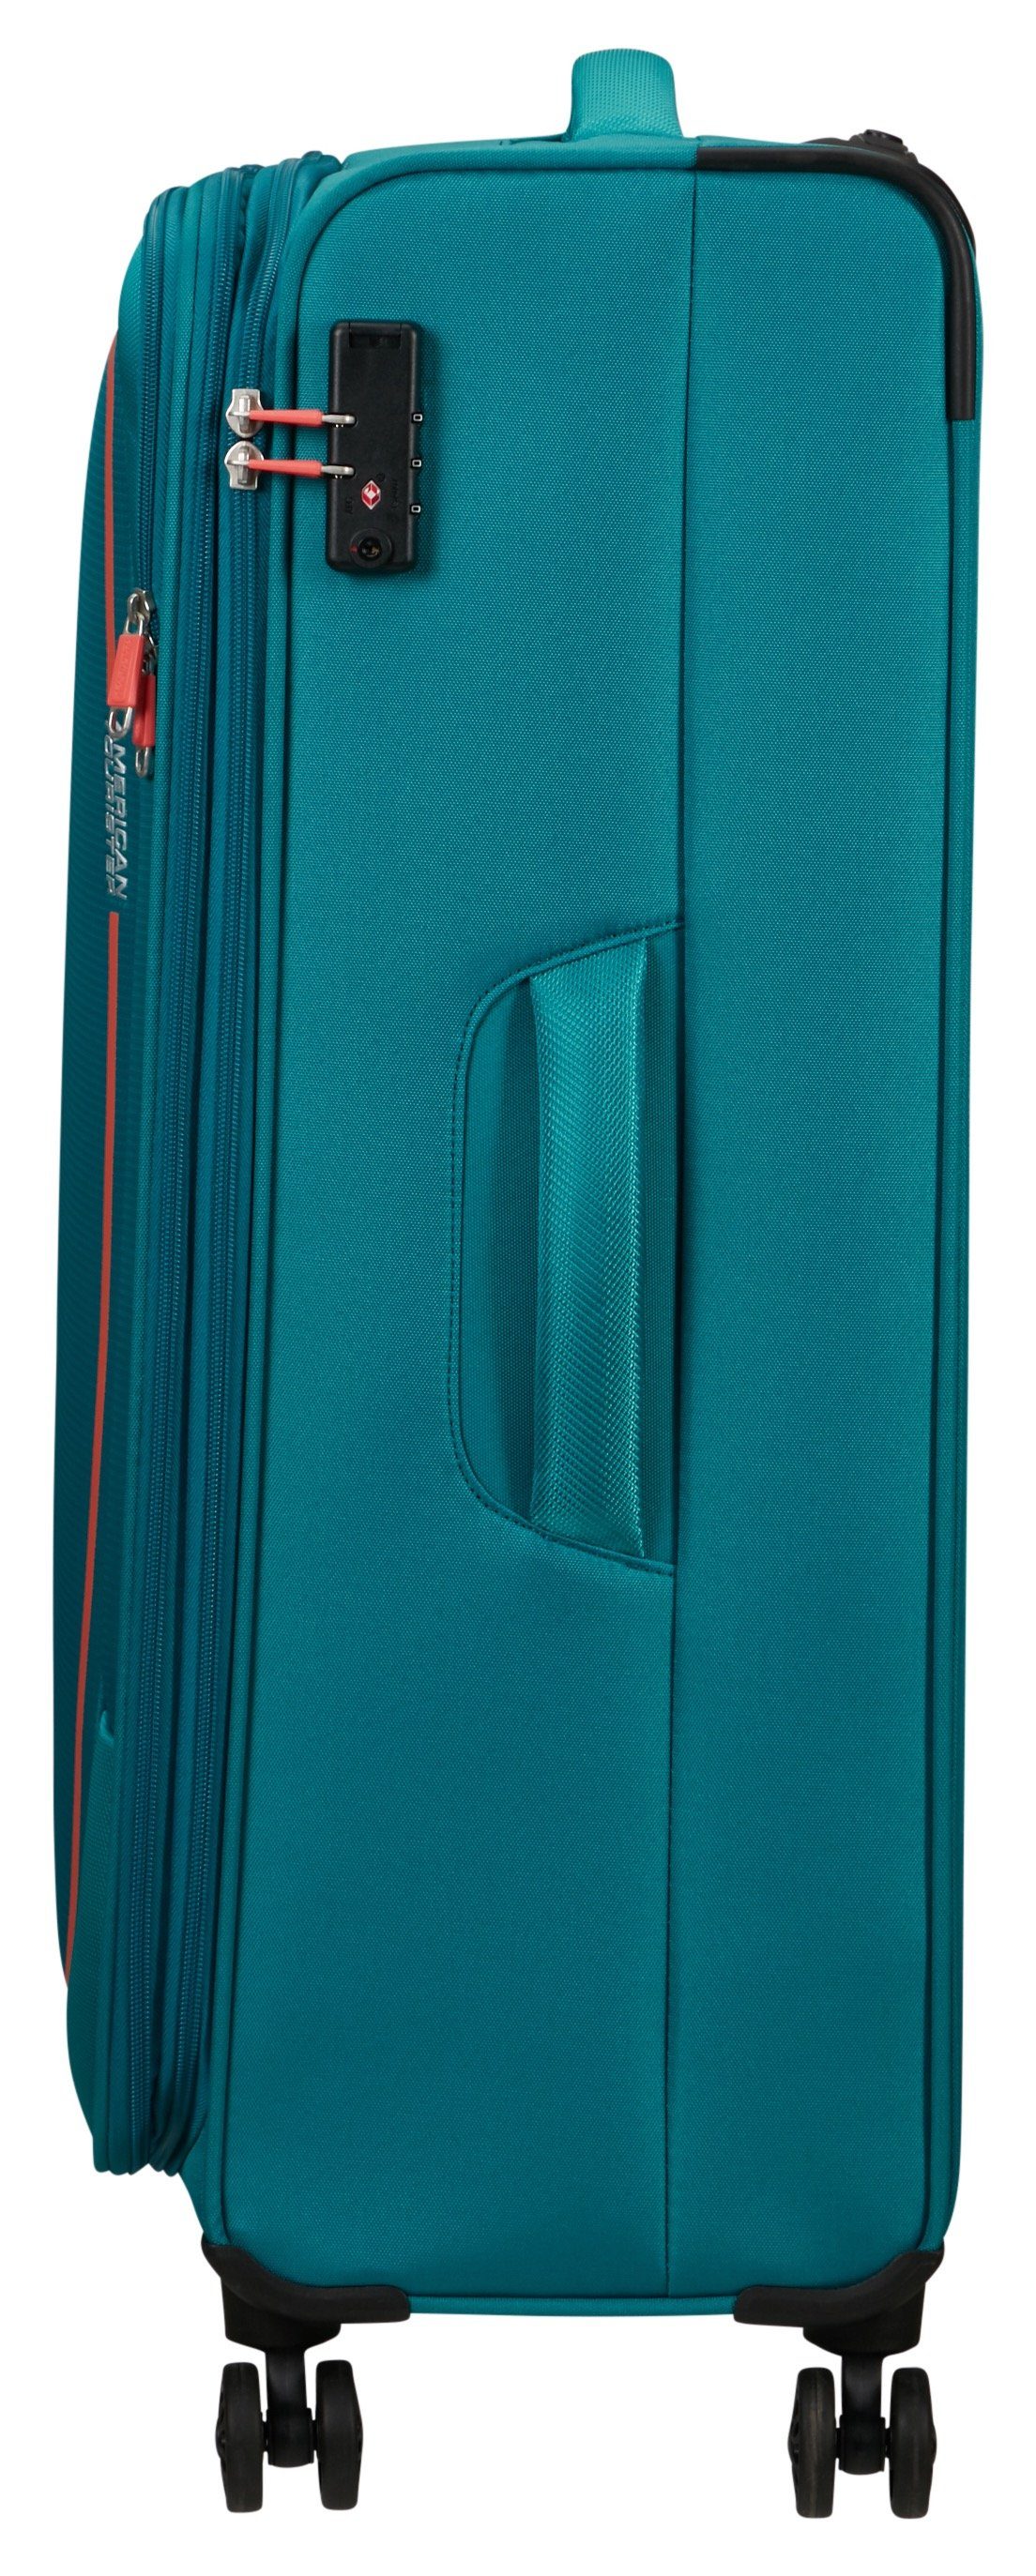 Koffer American stone PULSONIC Tourister® teal 80, 4 Spinner Rollen